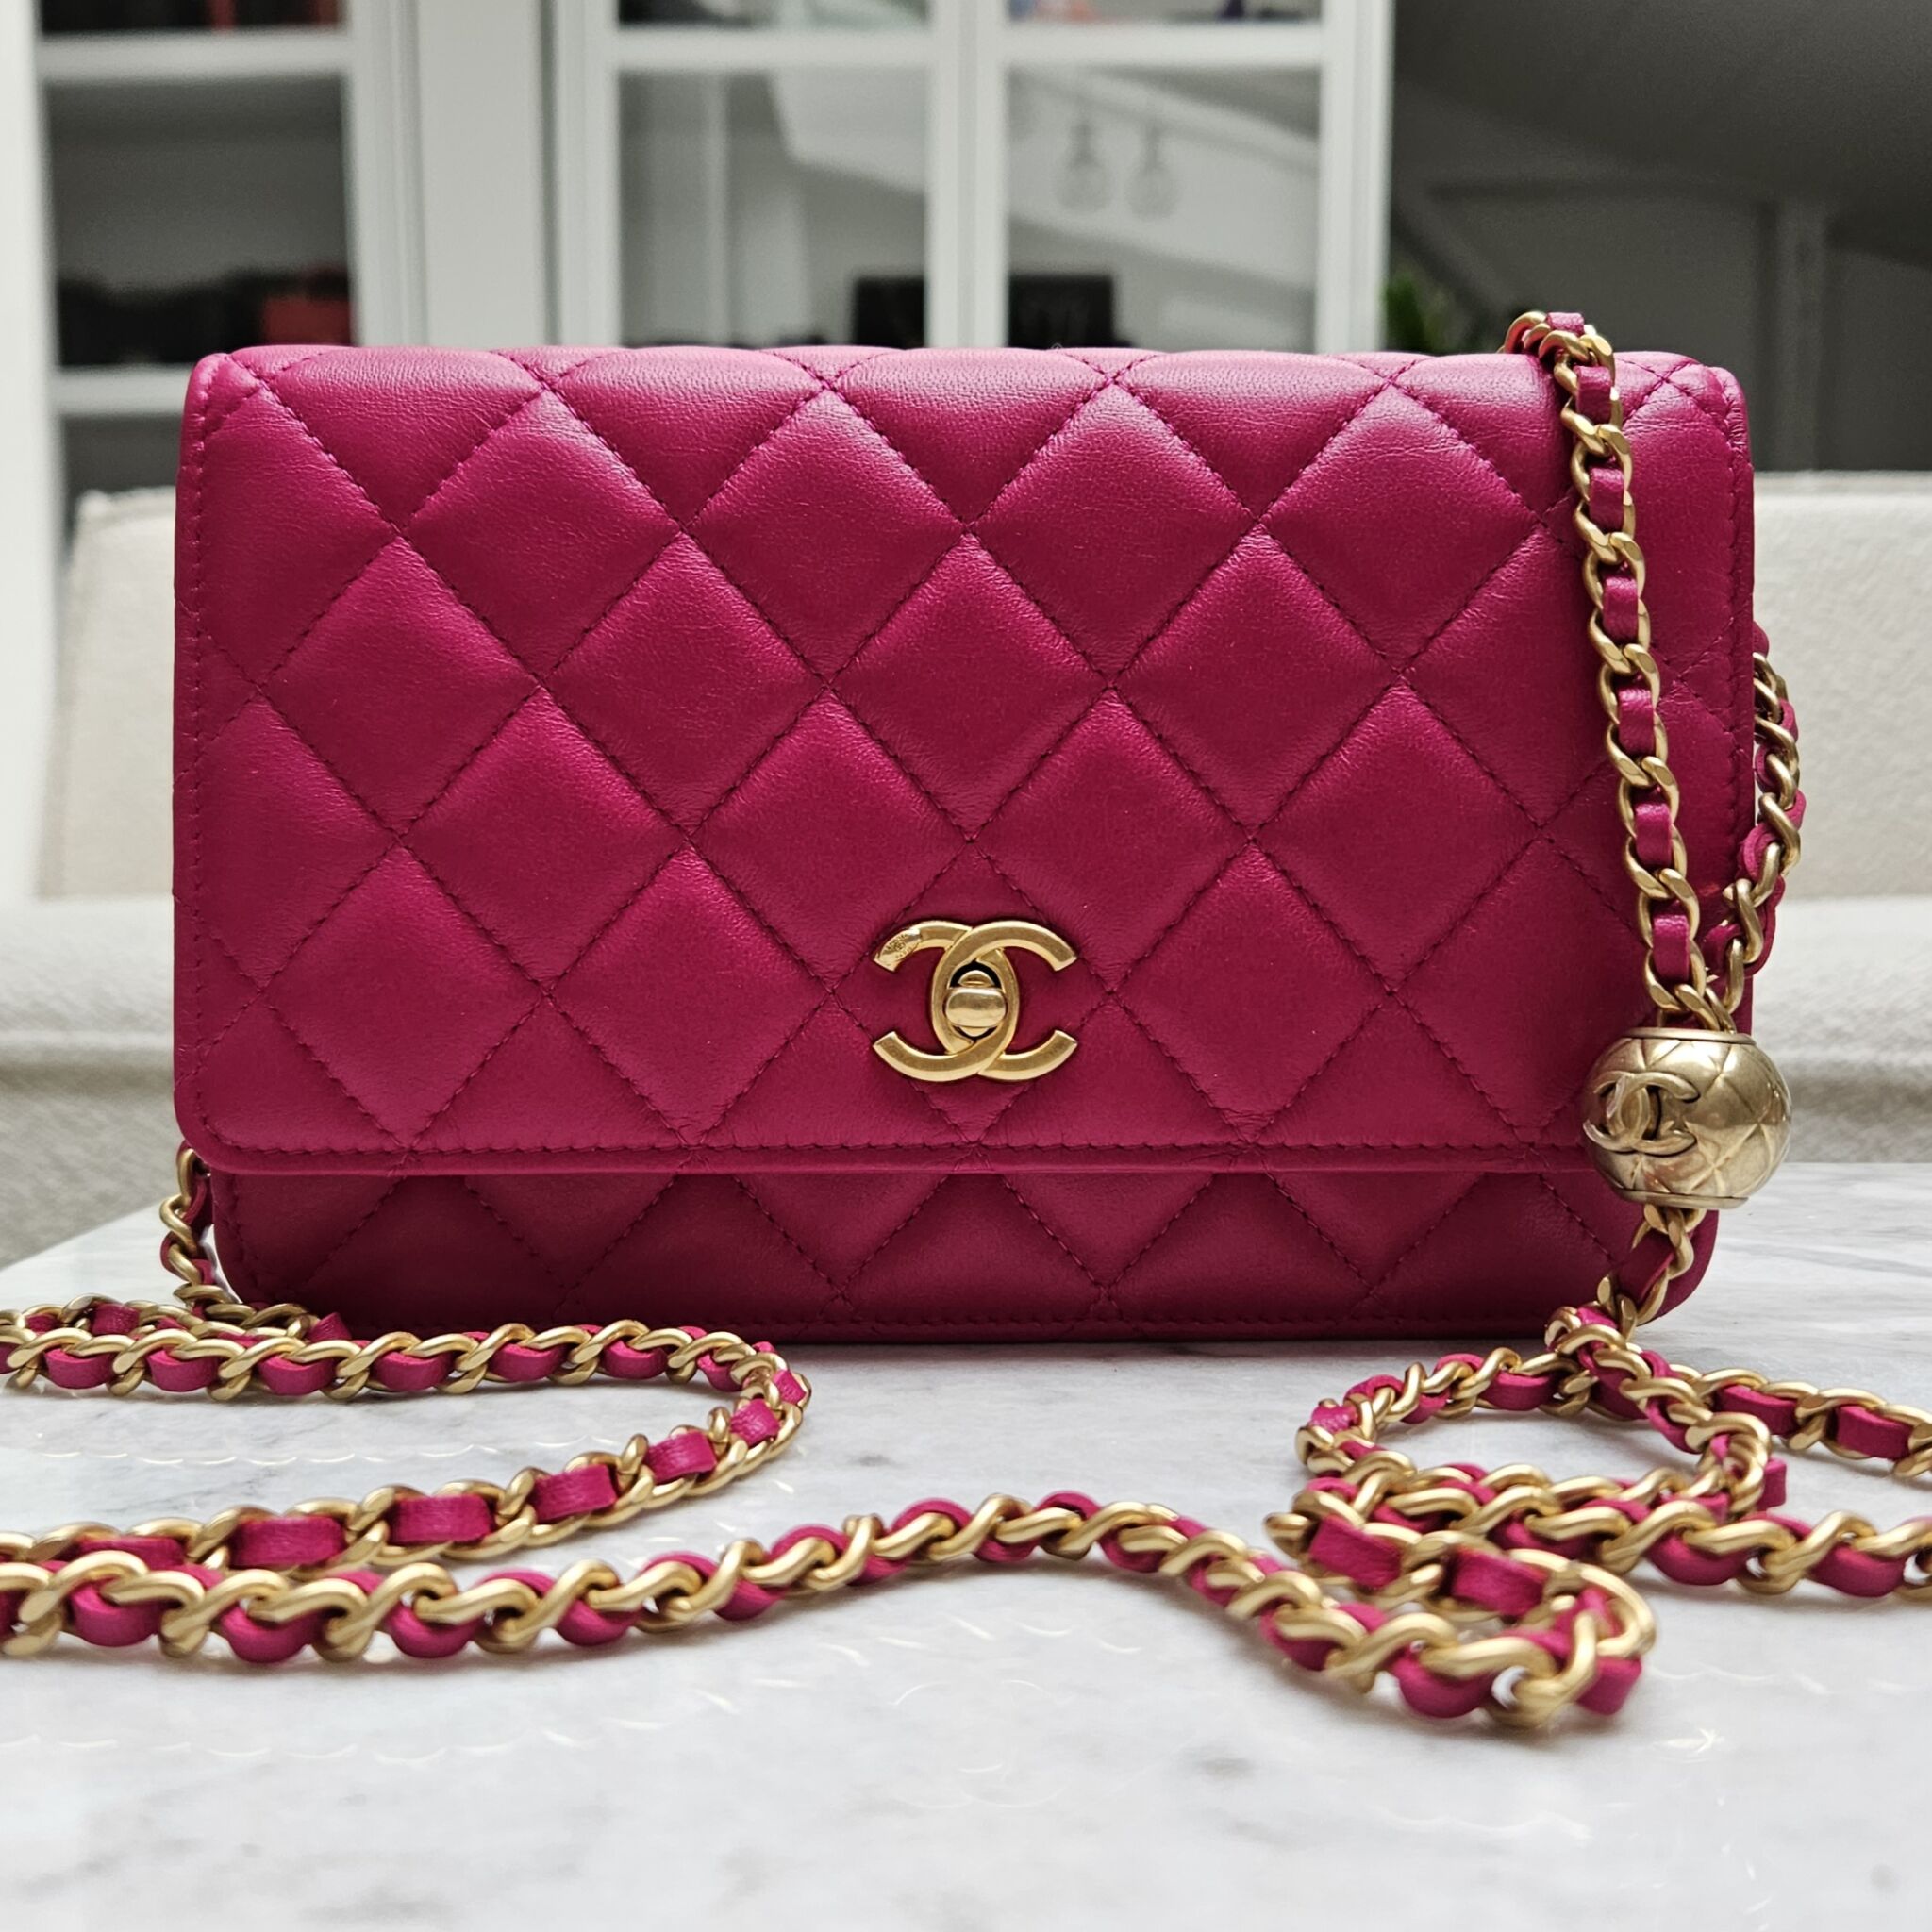 What is the price of the Chanel Mini Flap Bag that Cardi B received as a  gift from Latto? - Quora